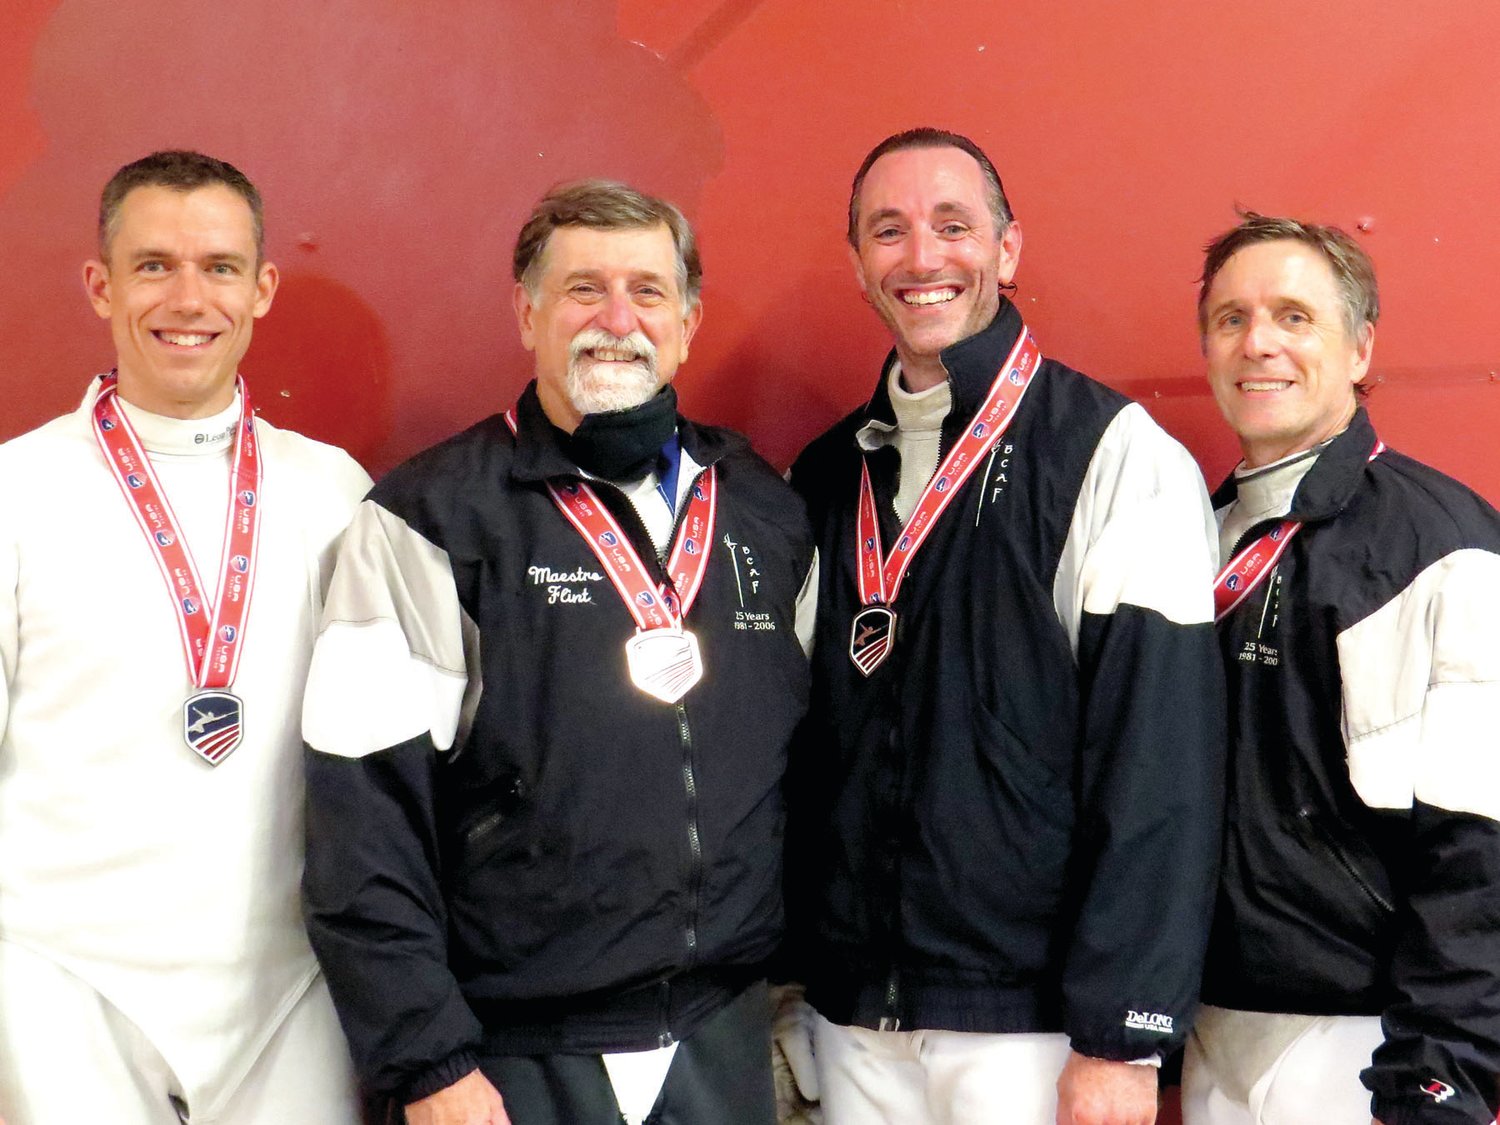 Jesse Lamberth, Jim Flint, Mark Turdo and Paul Epply-Schmidt represented Bucks County Academy of Fencing on the podium at the USA Fencing National Championships.